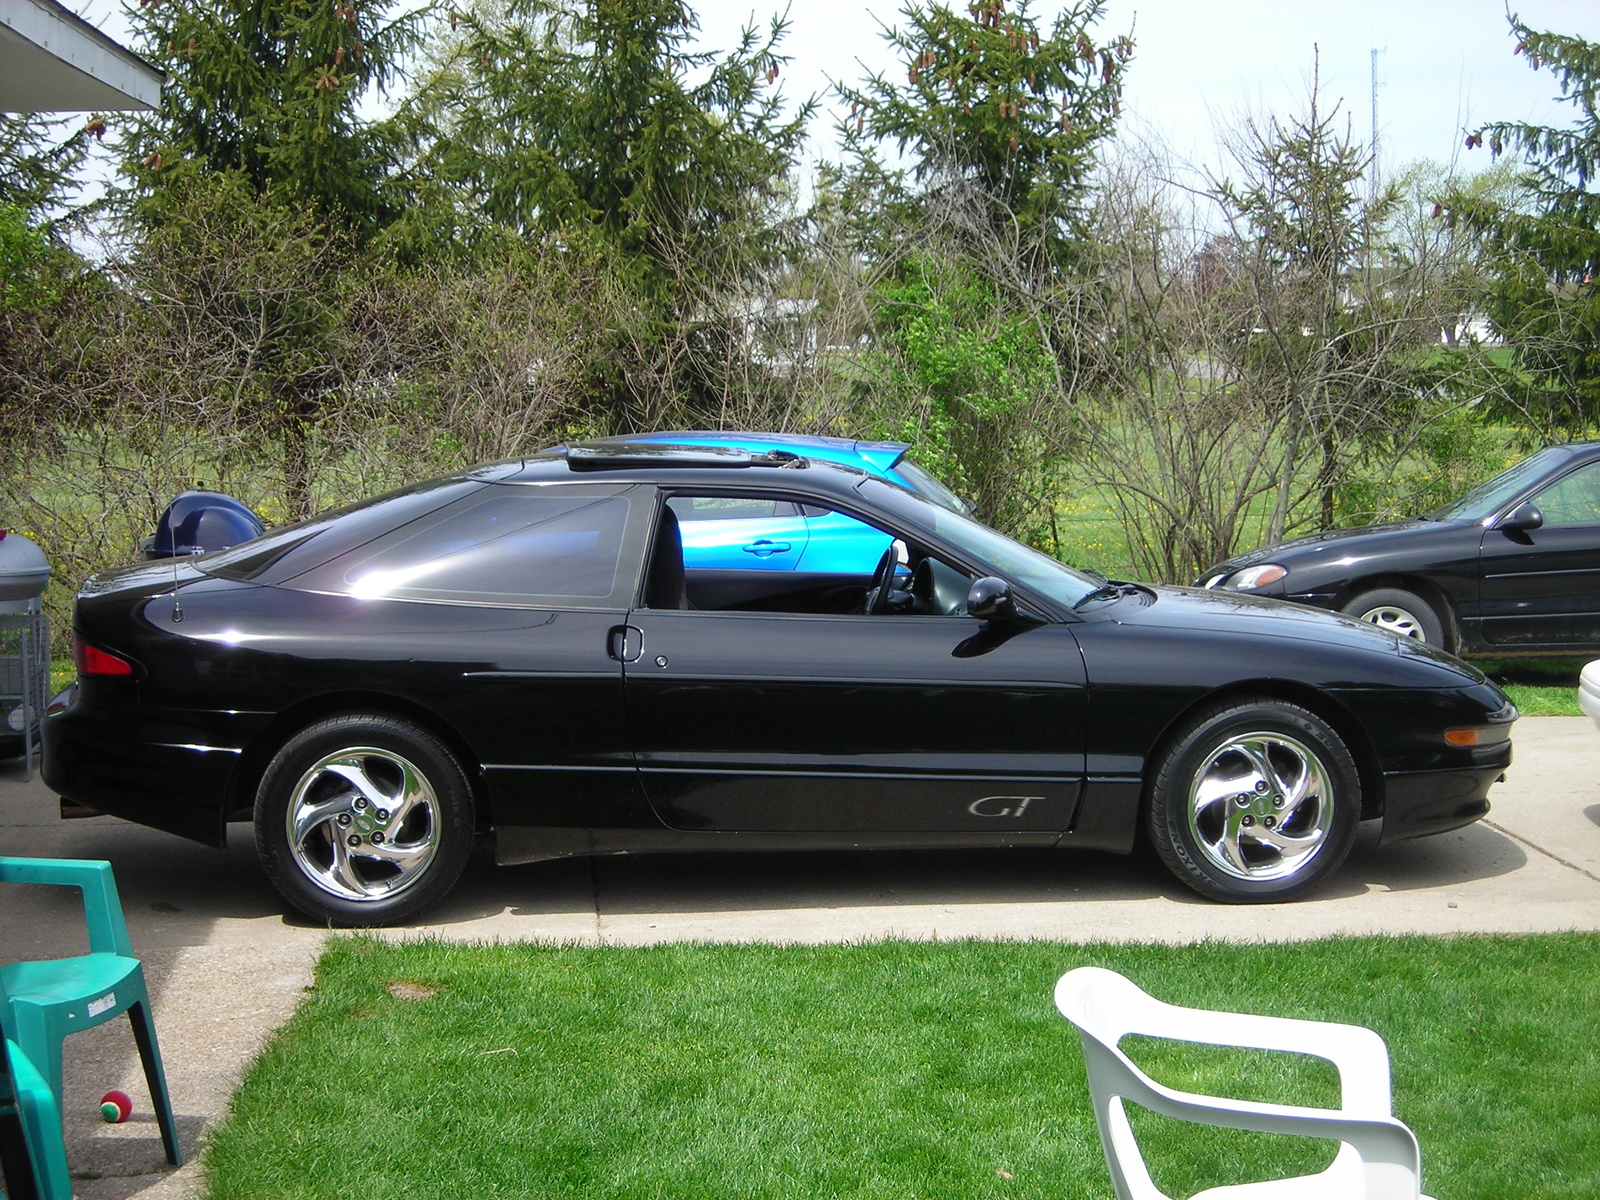 1997 Ford probe consumer reviews #7